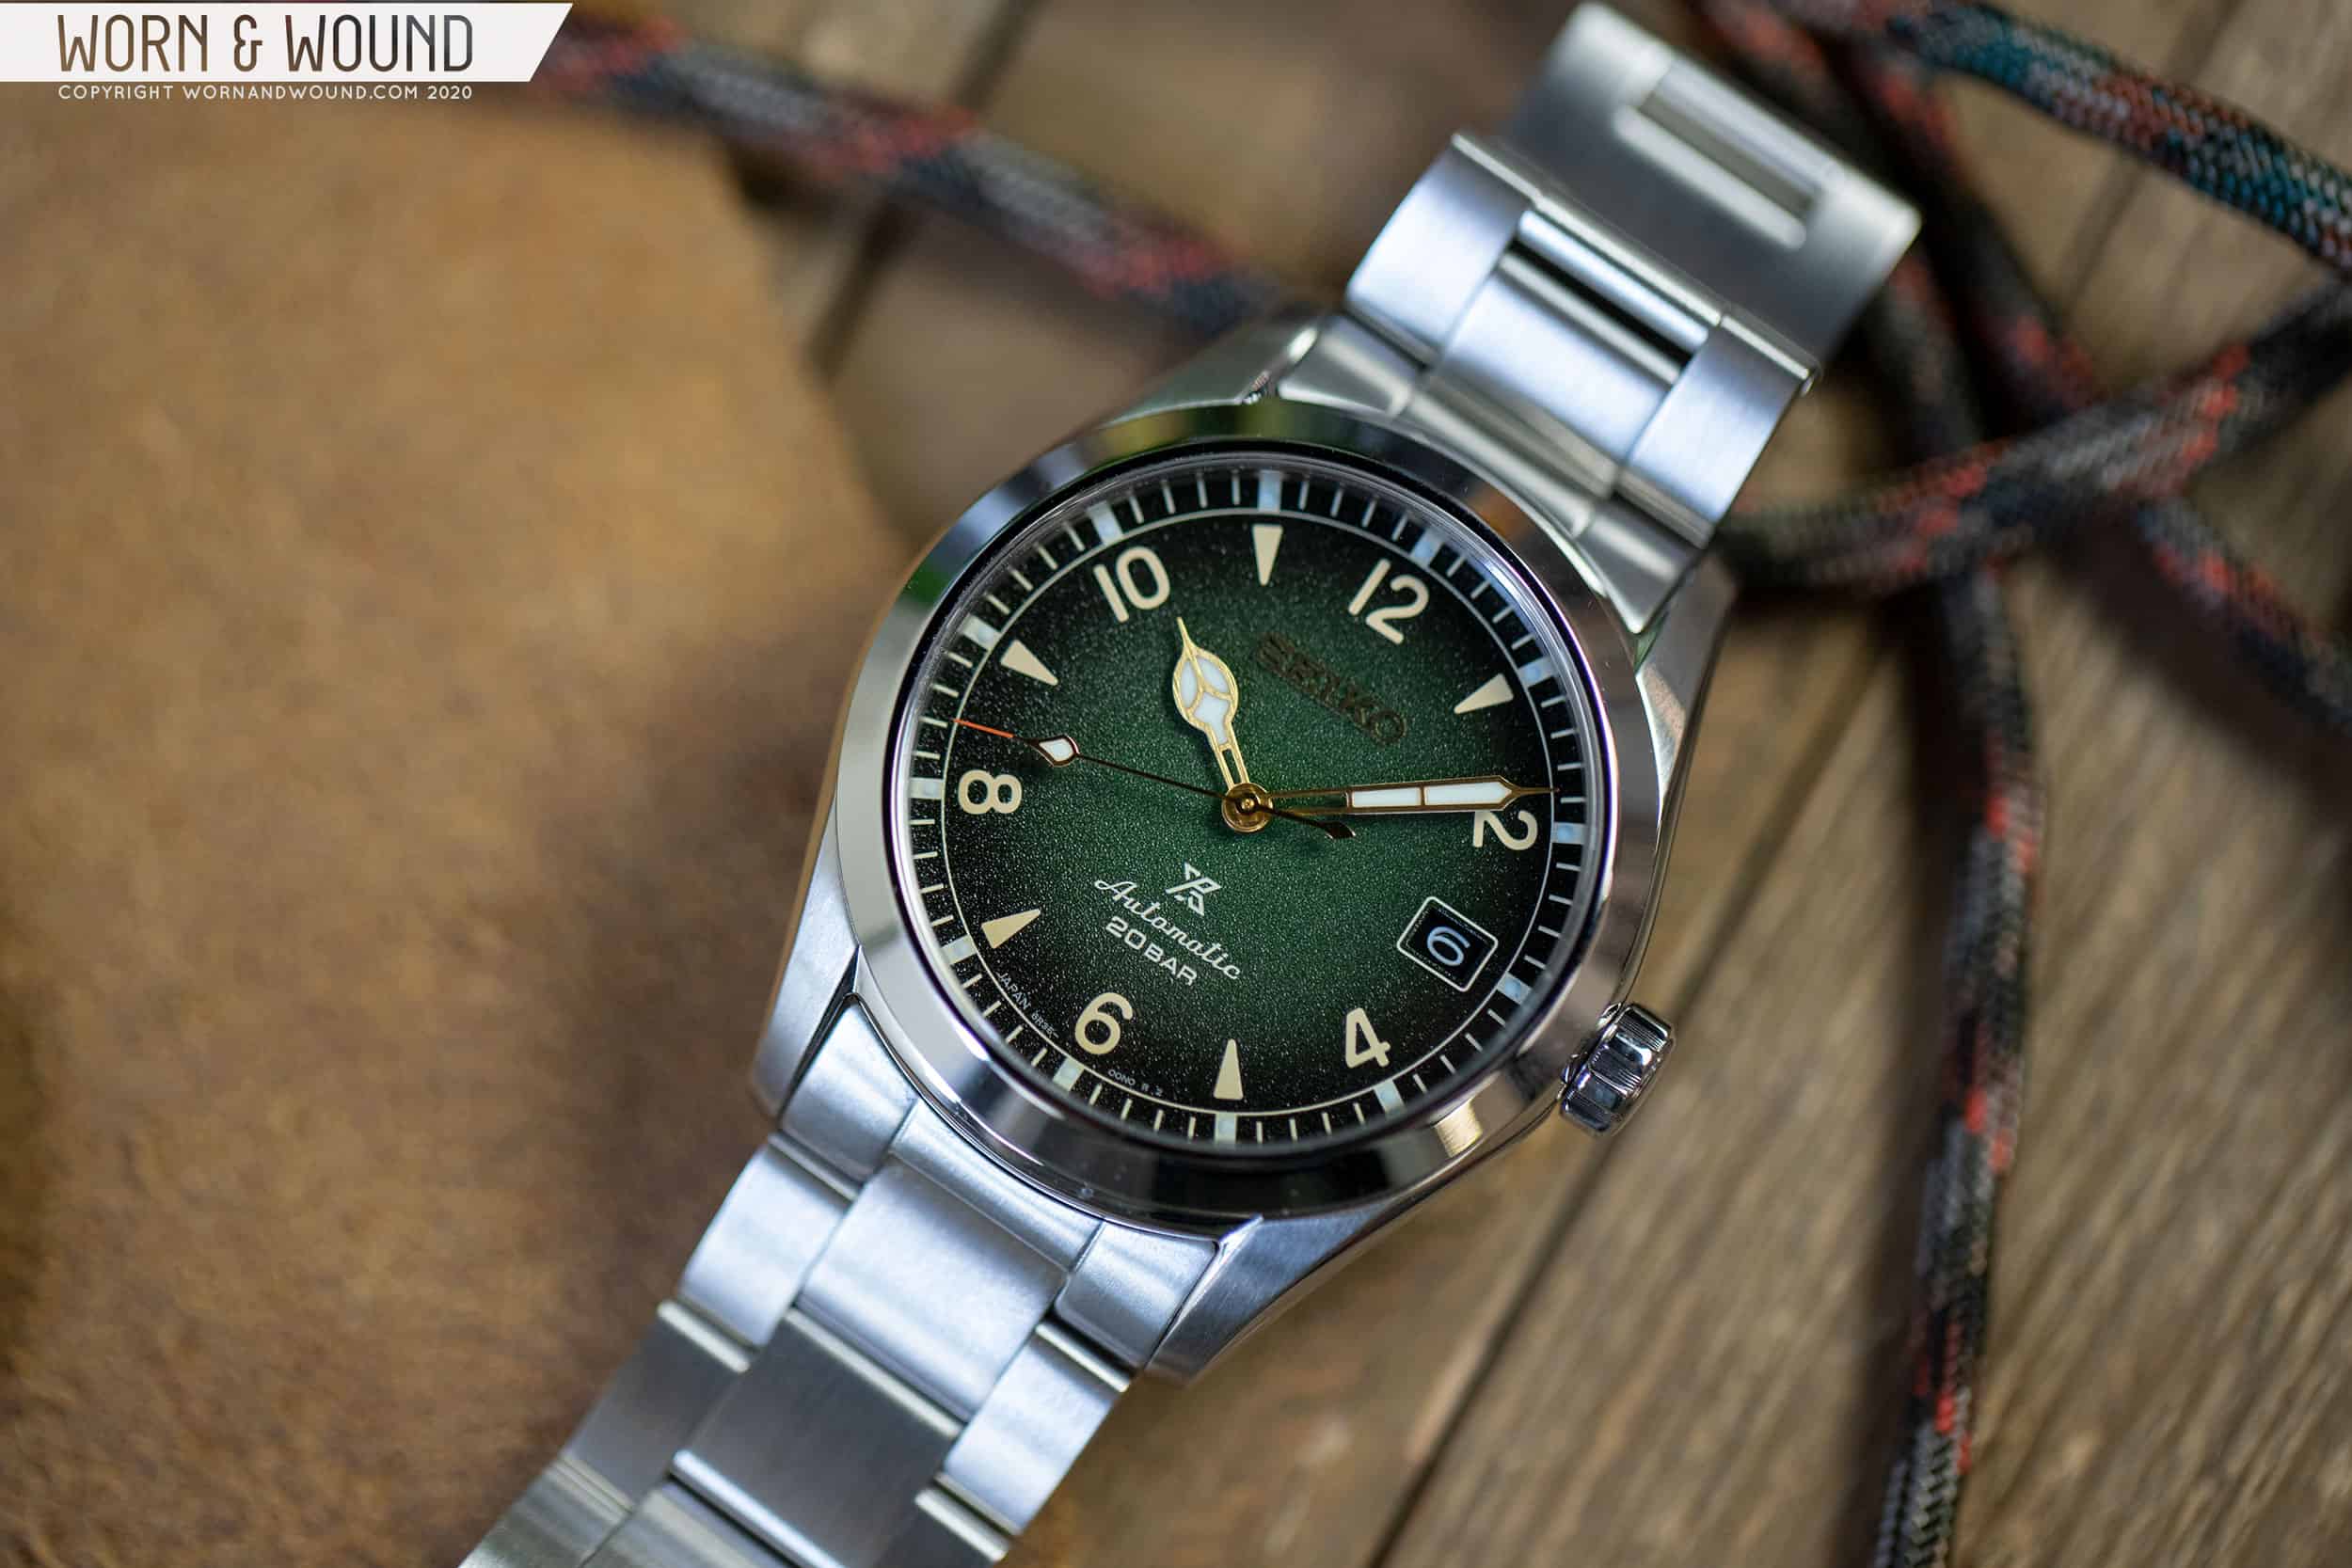 First Look: Seiko Expands their Alpinist Line with a New, Smaller Model -  Worn & Wound